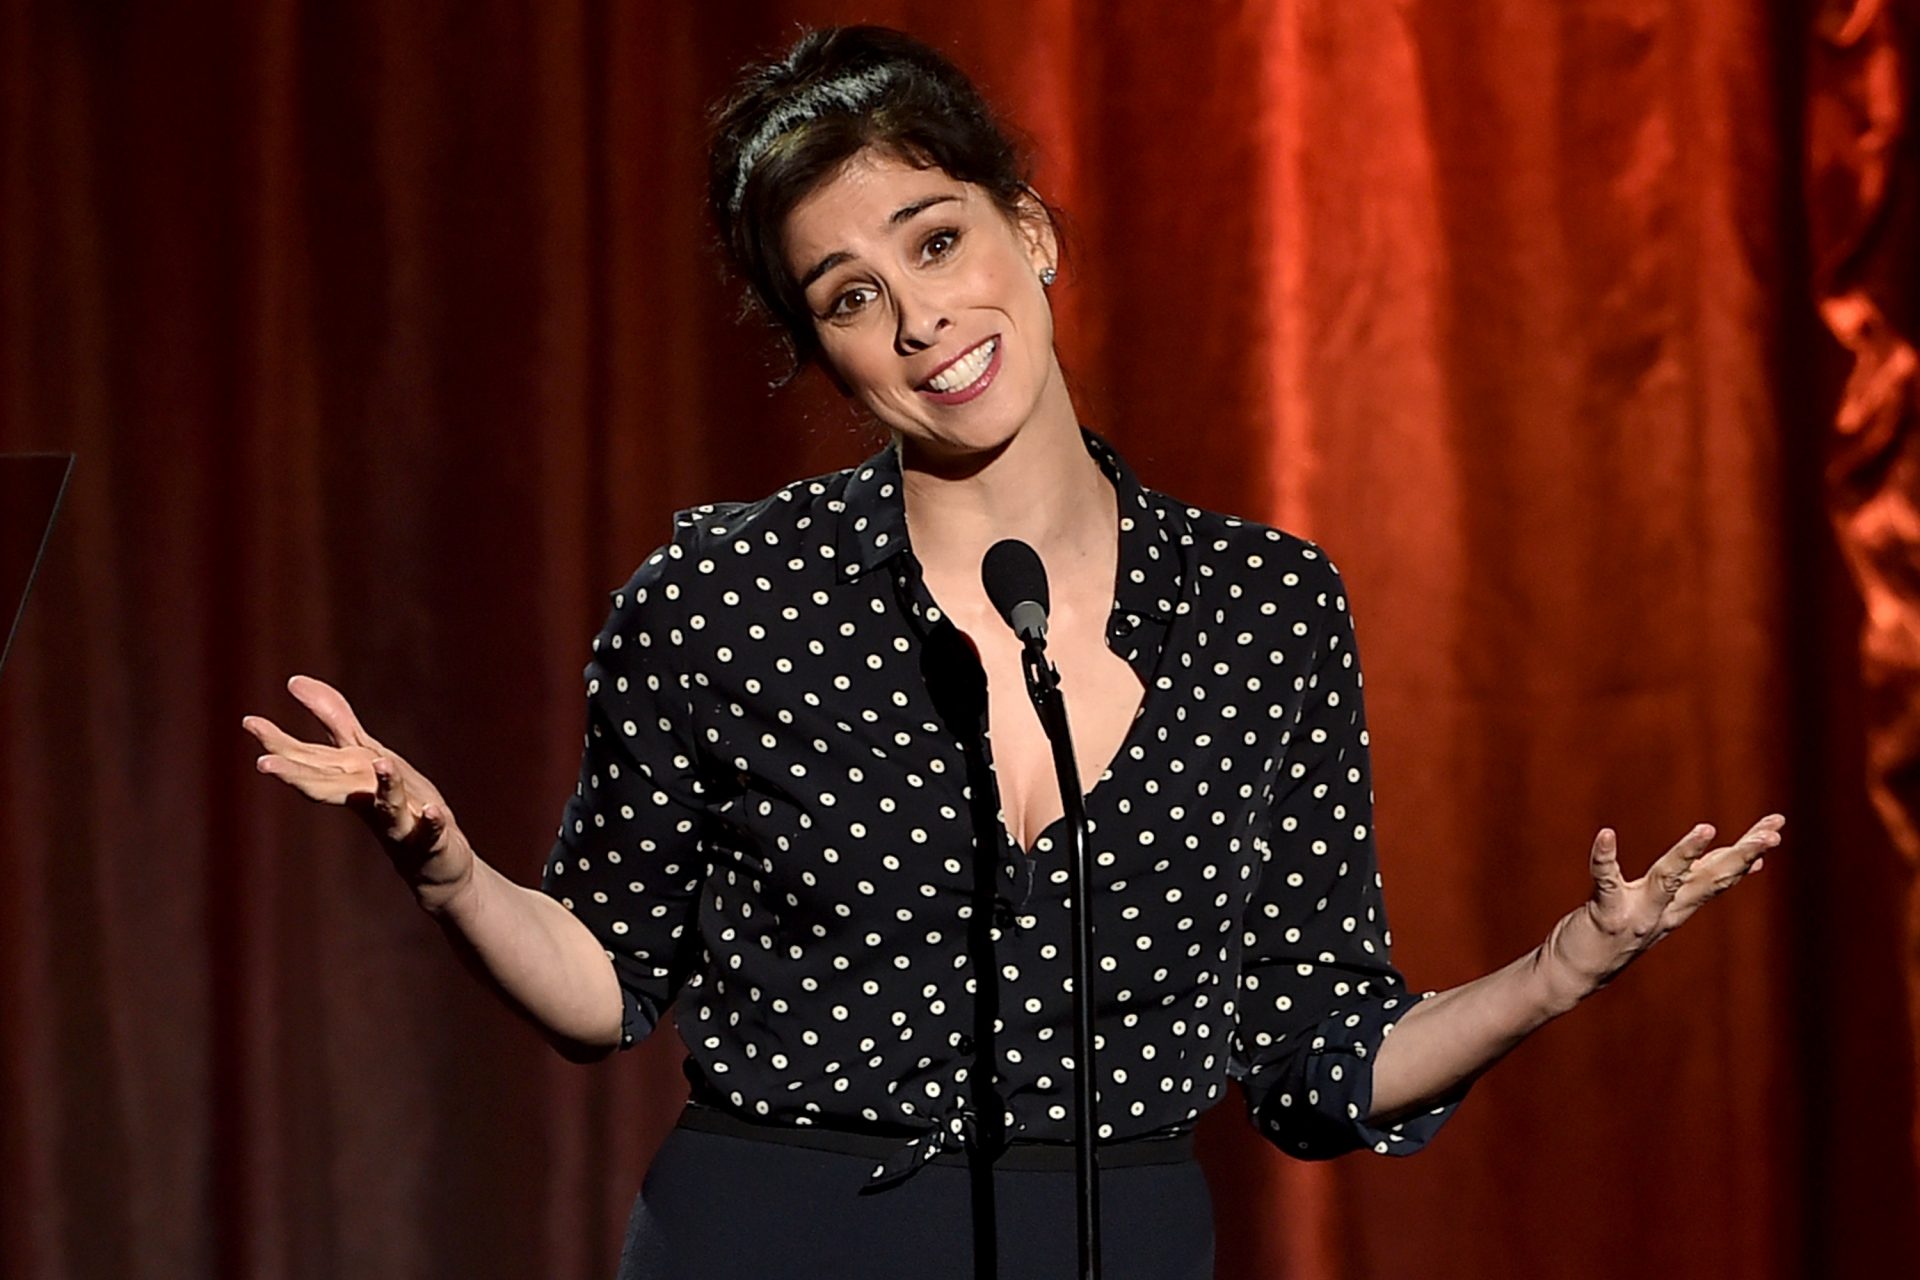 Sarah Silverman: “Fight for a two state solution… but make no mistake, Hamas is a terror organization” 